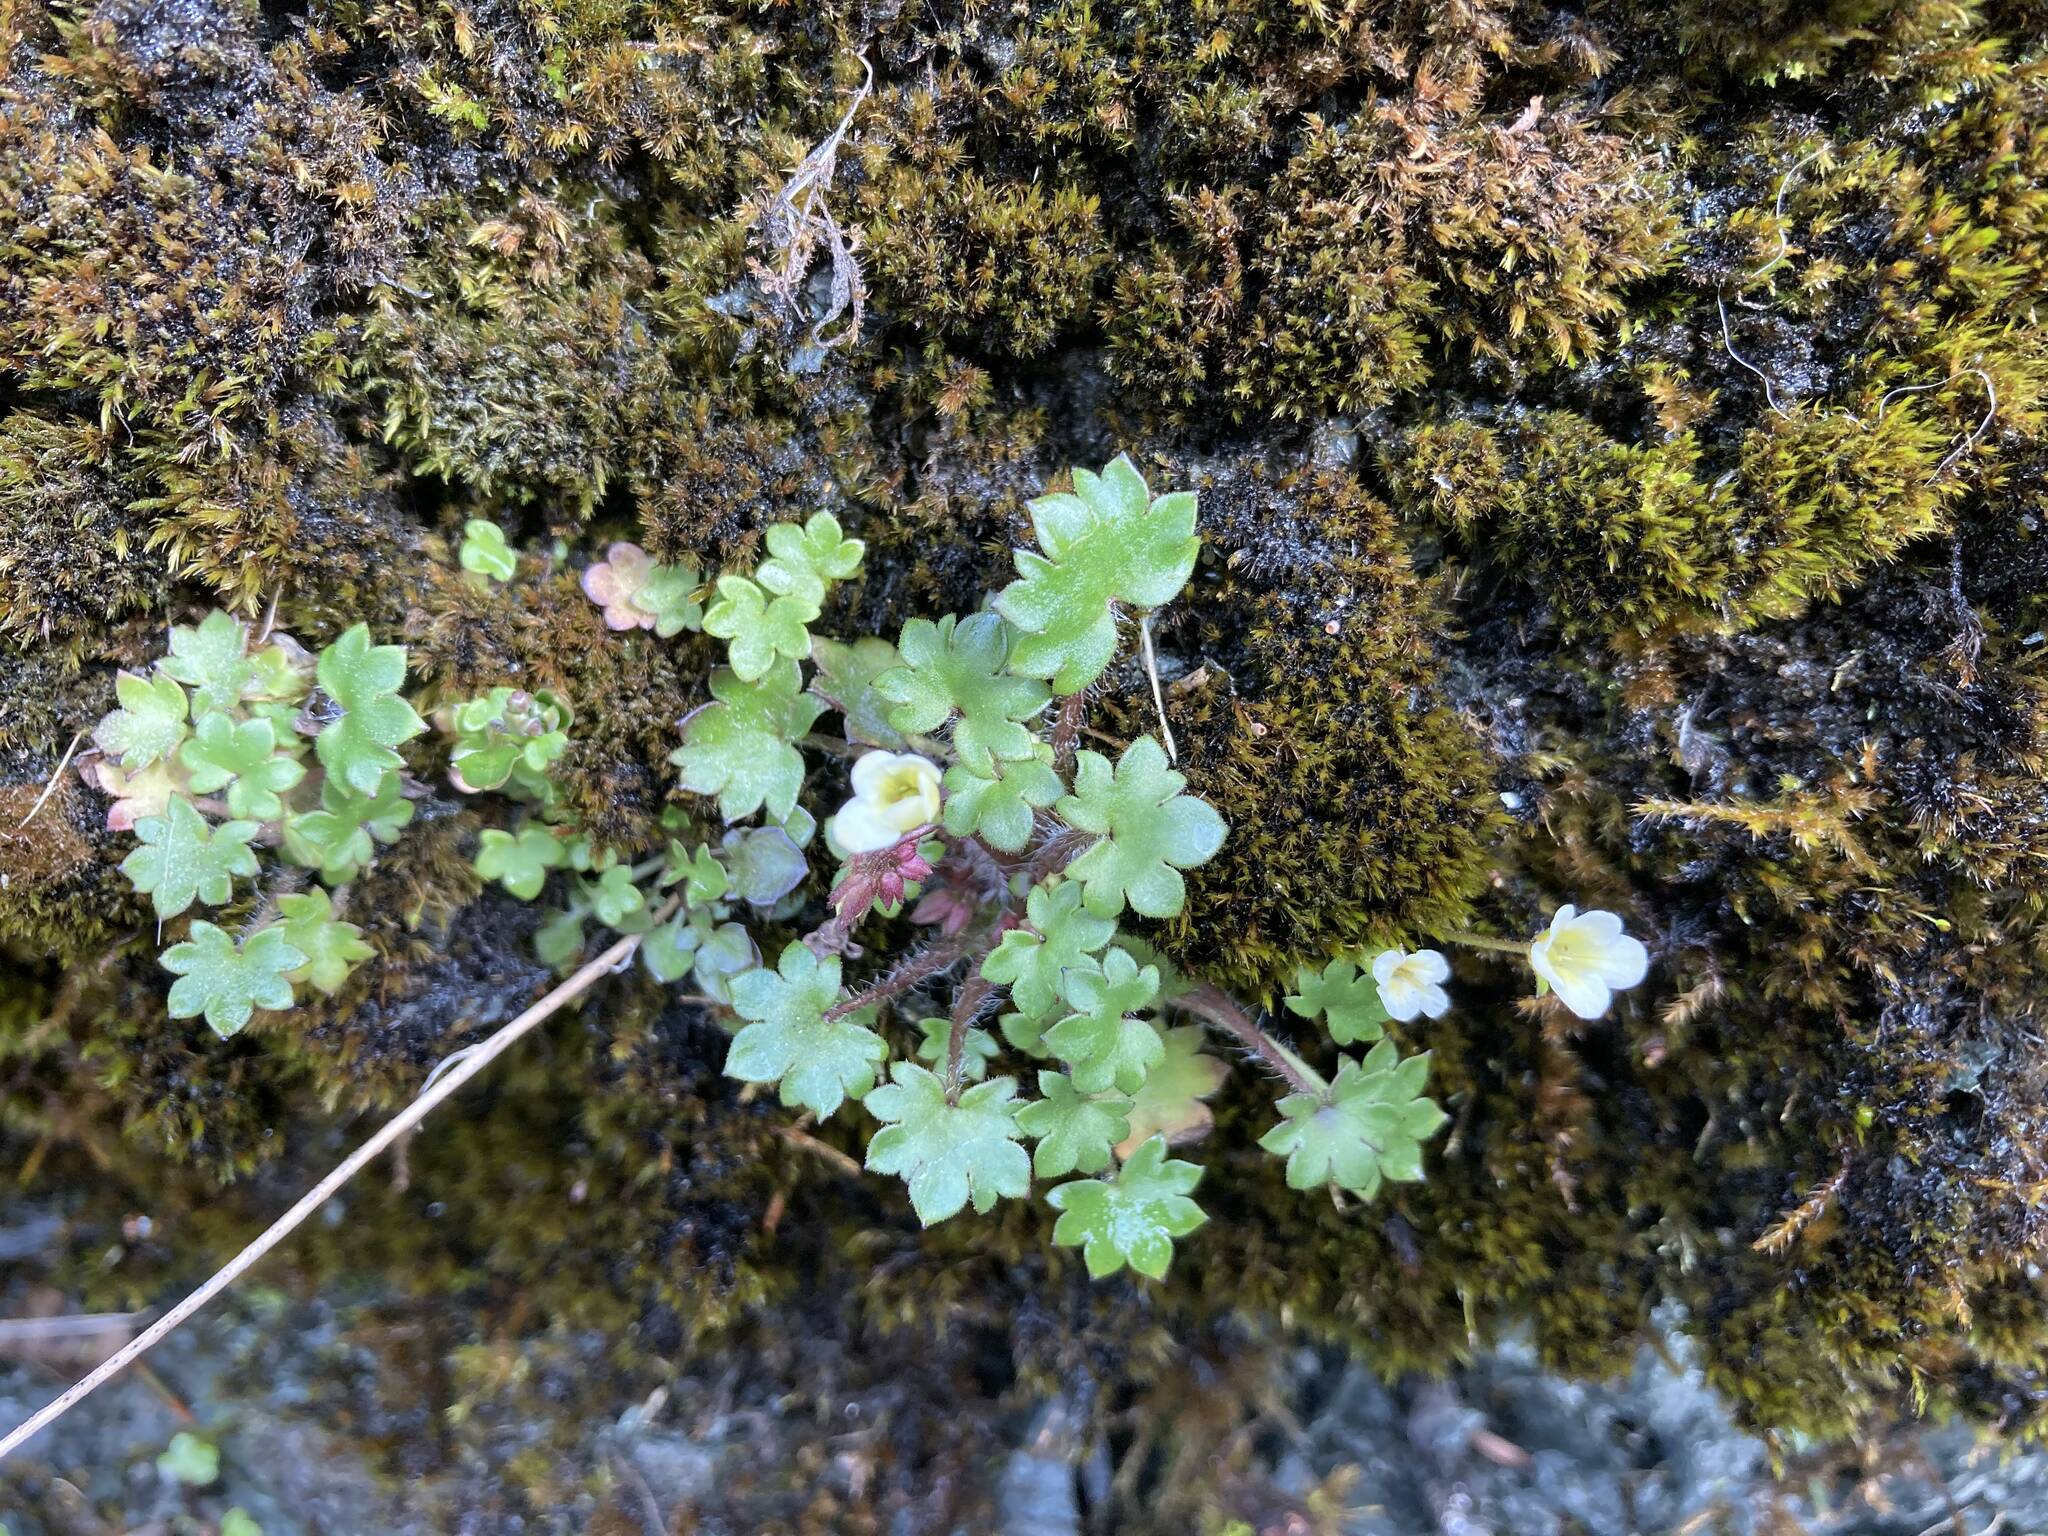 An unusually tiny-flowered specimen of Romanzoffia sitchensis (‘mist-maiden’) blooms on a cliff near the road (Mary F. Willson / For the Juneau Empire)